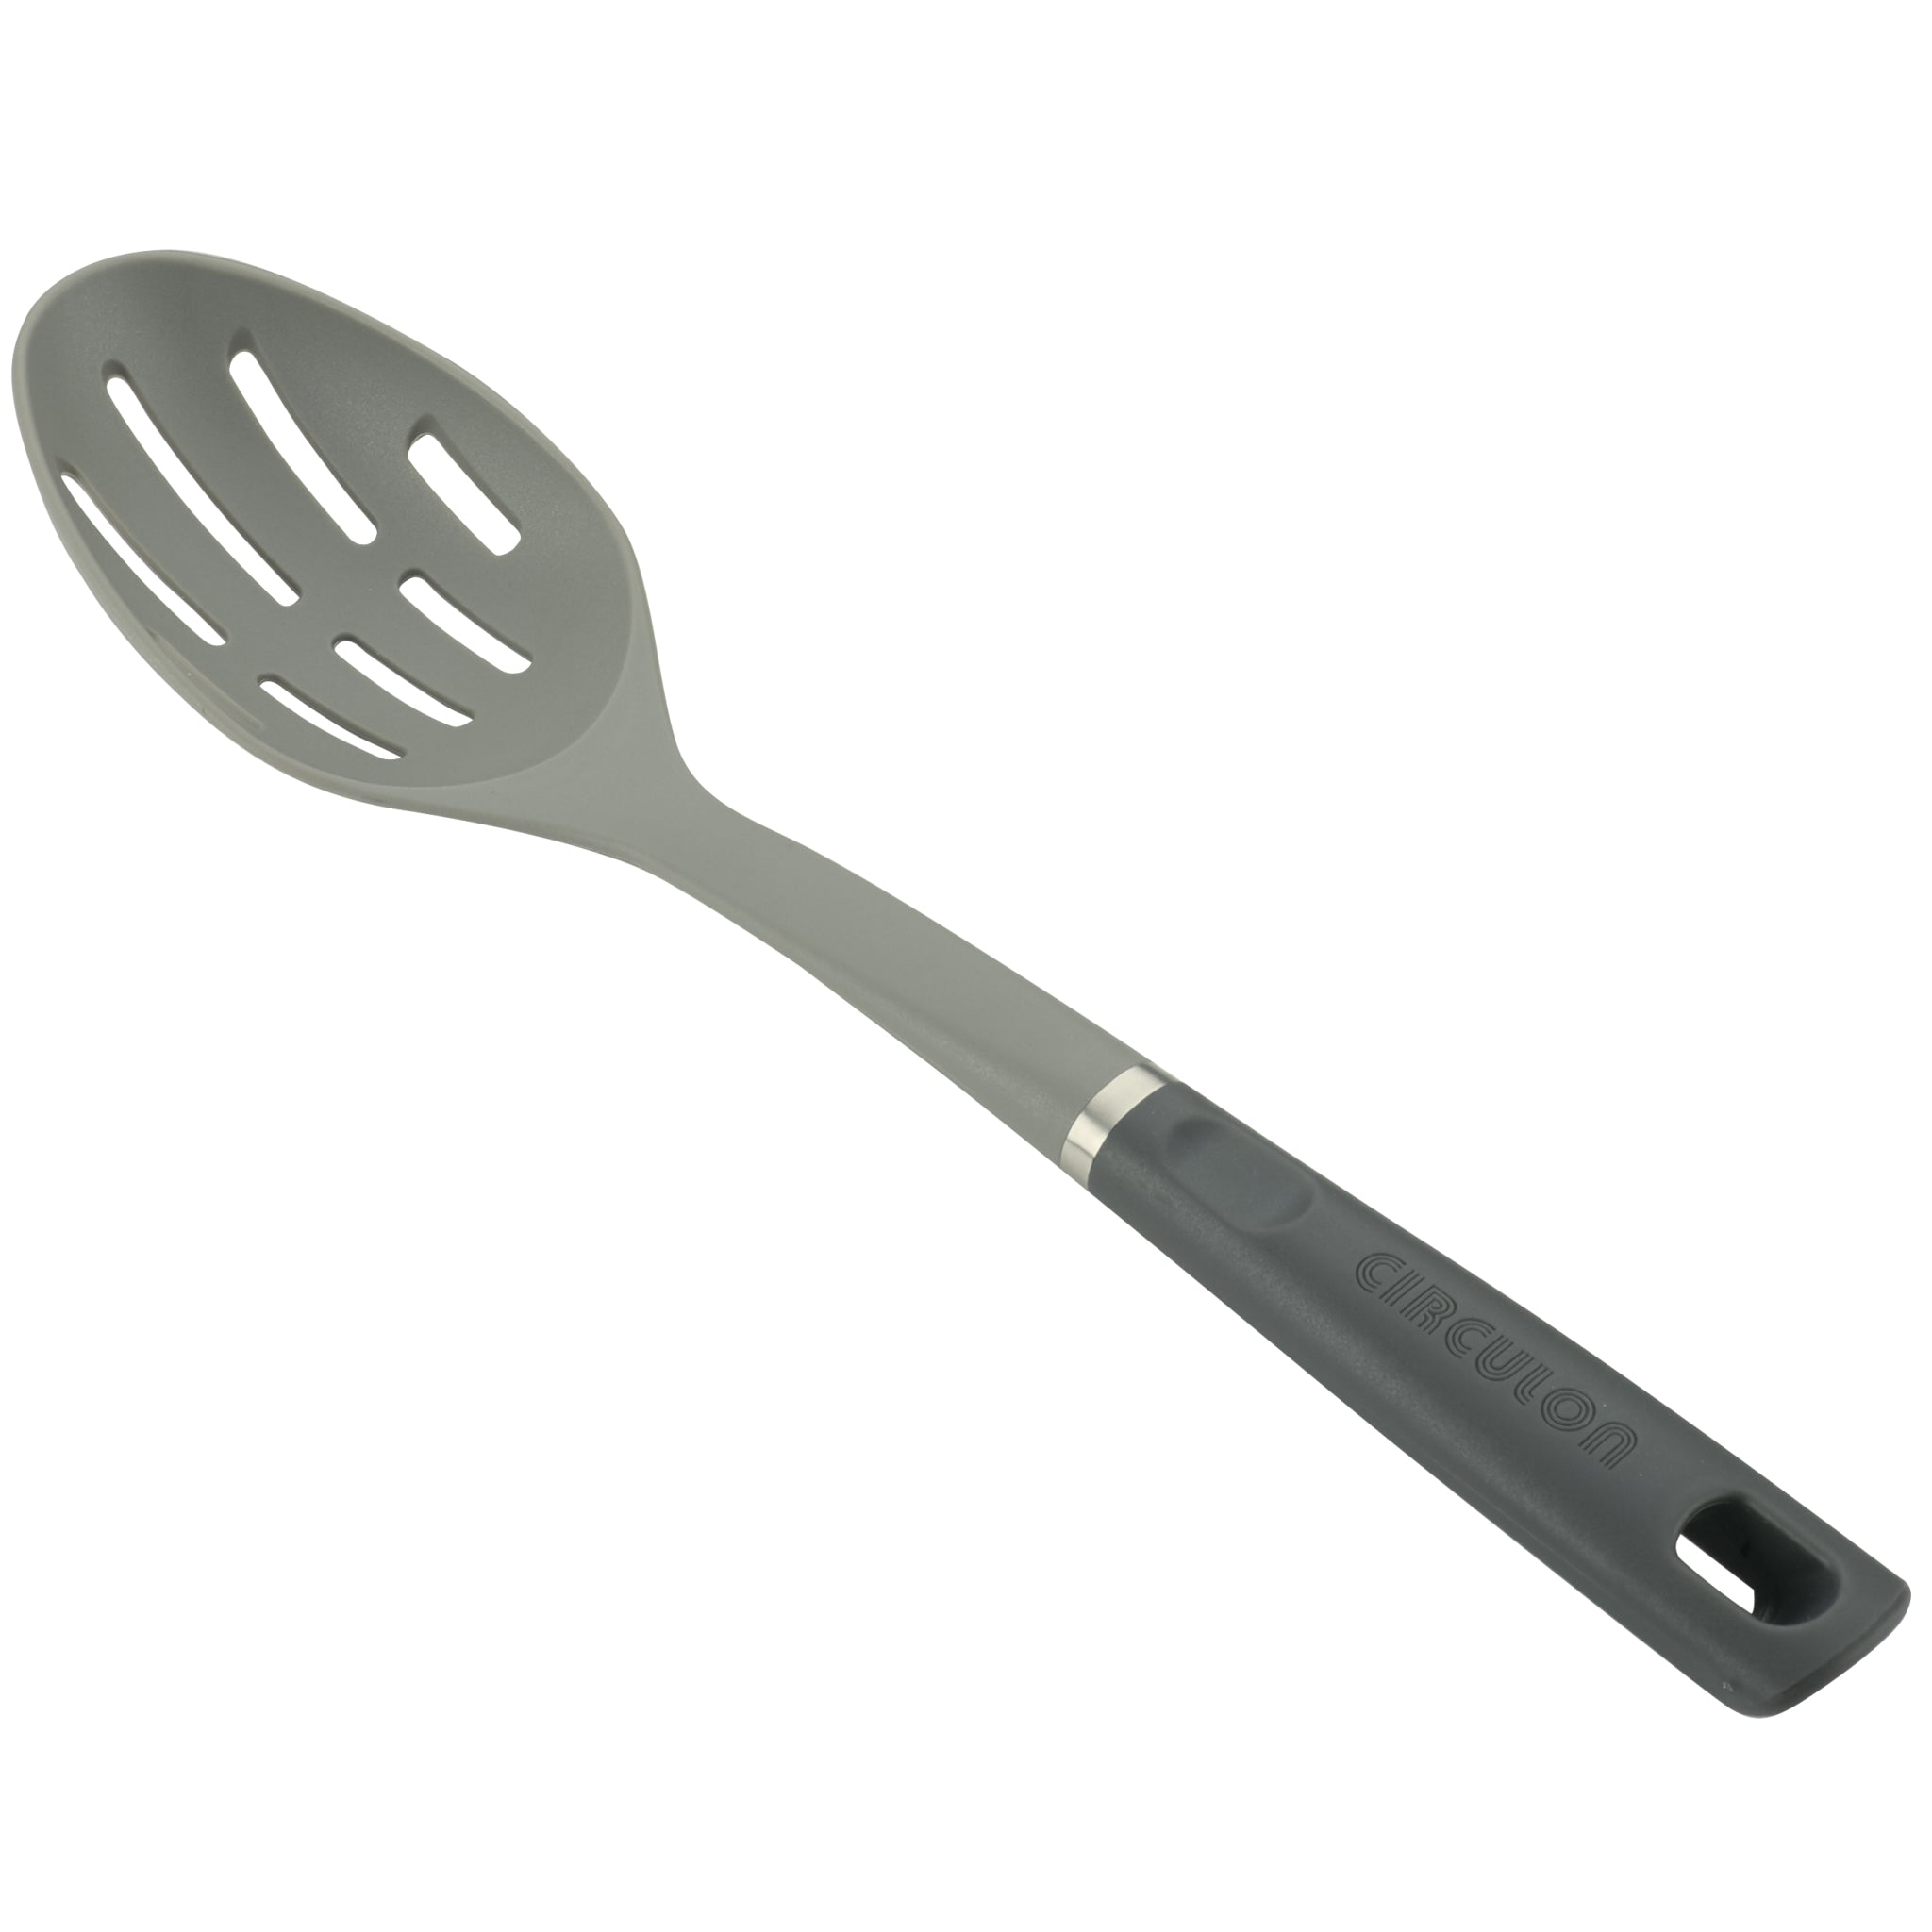 Circulon 13.25-inch Slotted Spoon